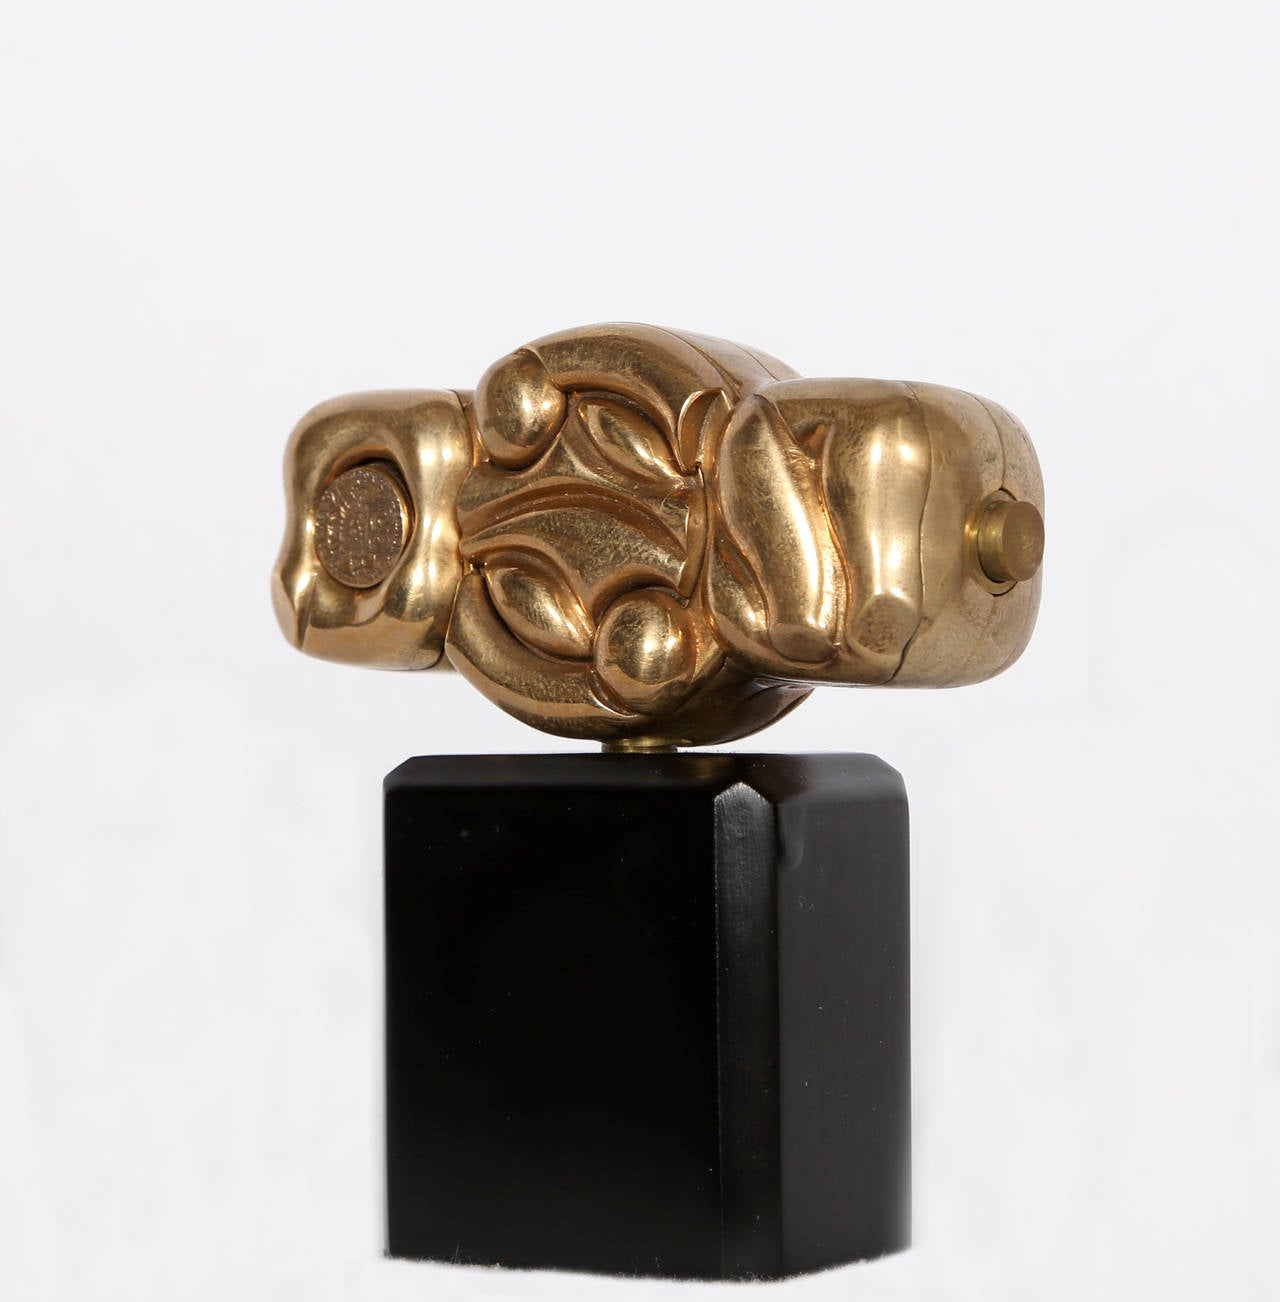 Maria B (Opus 303) - Gold Abstract Sculpture by Miguel Ortiz Berrocal